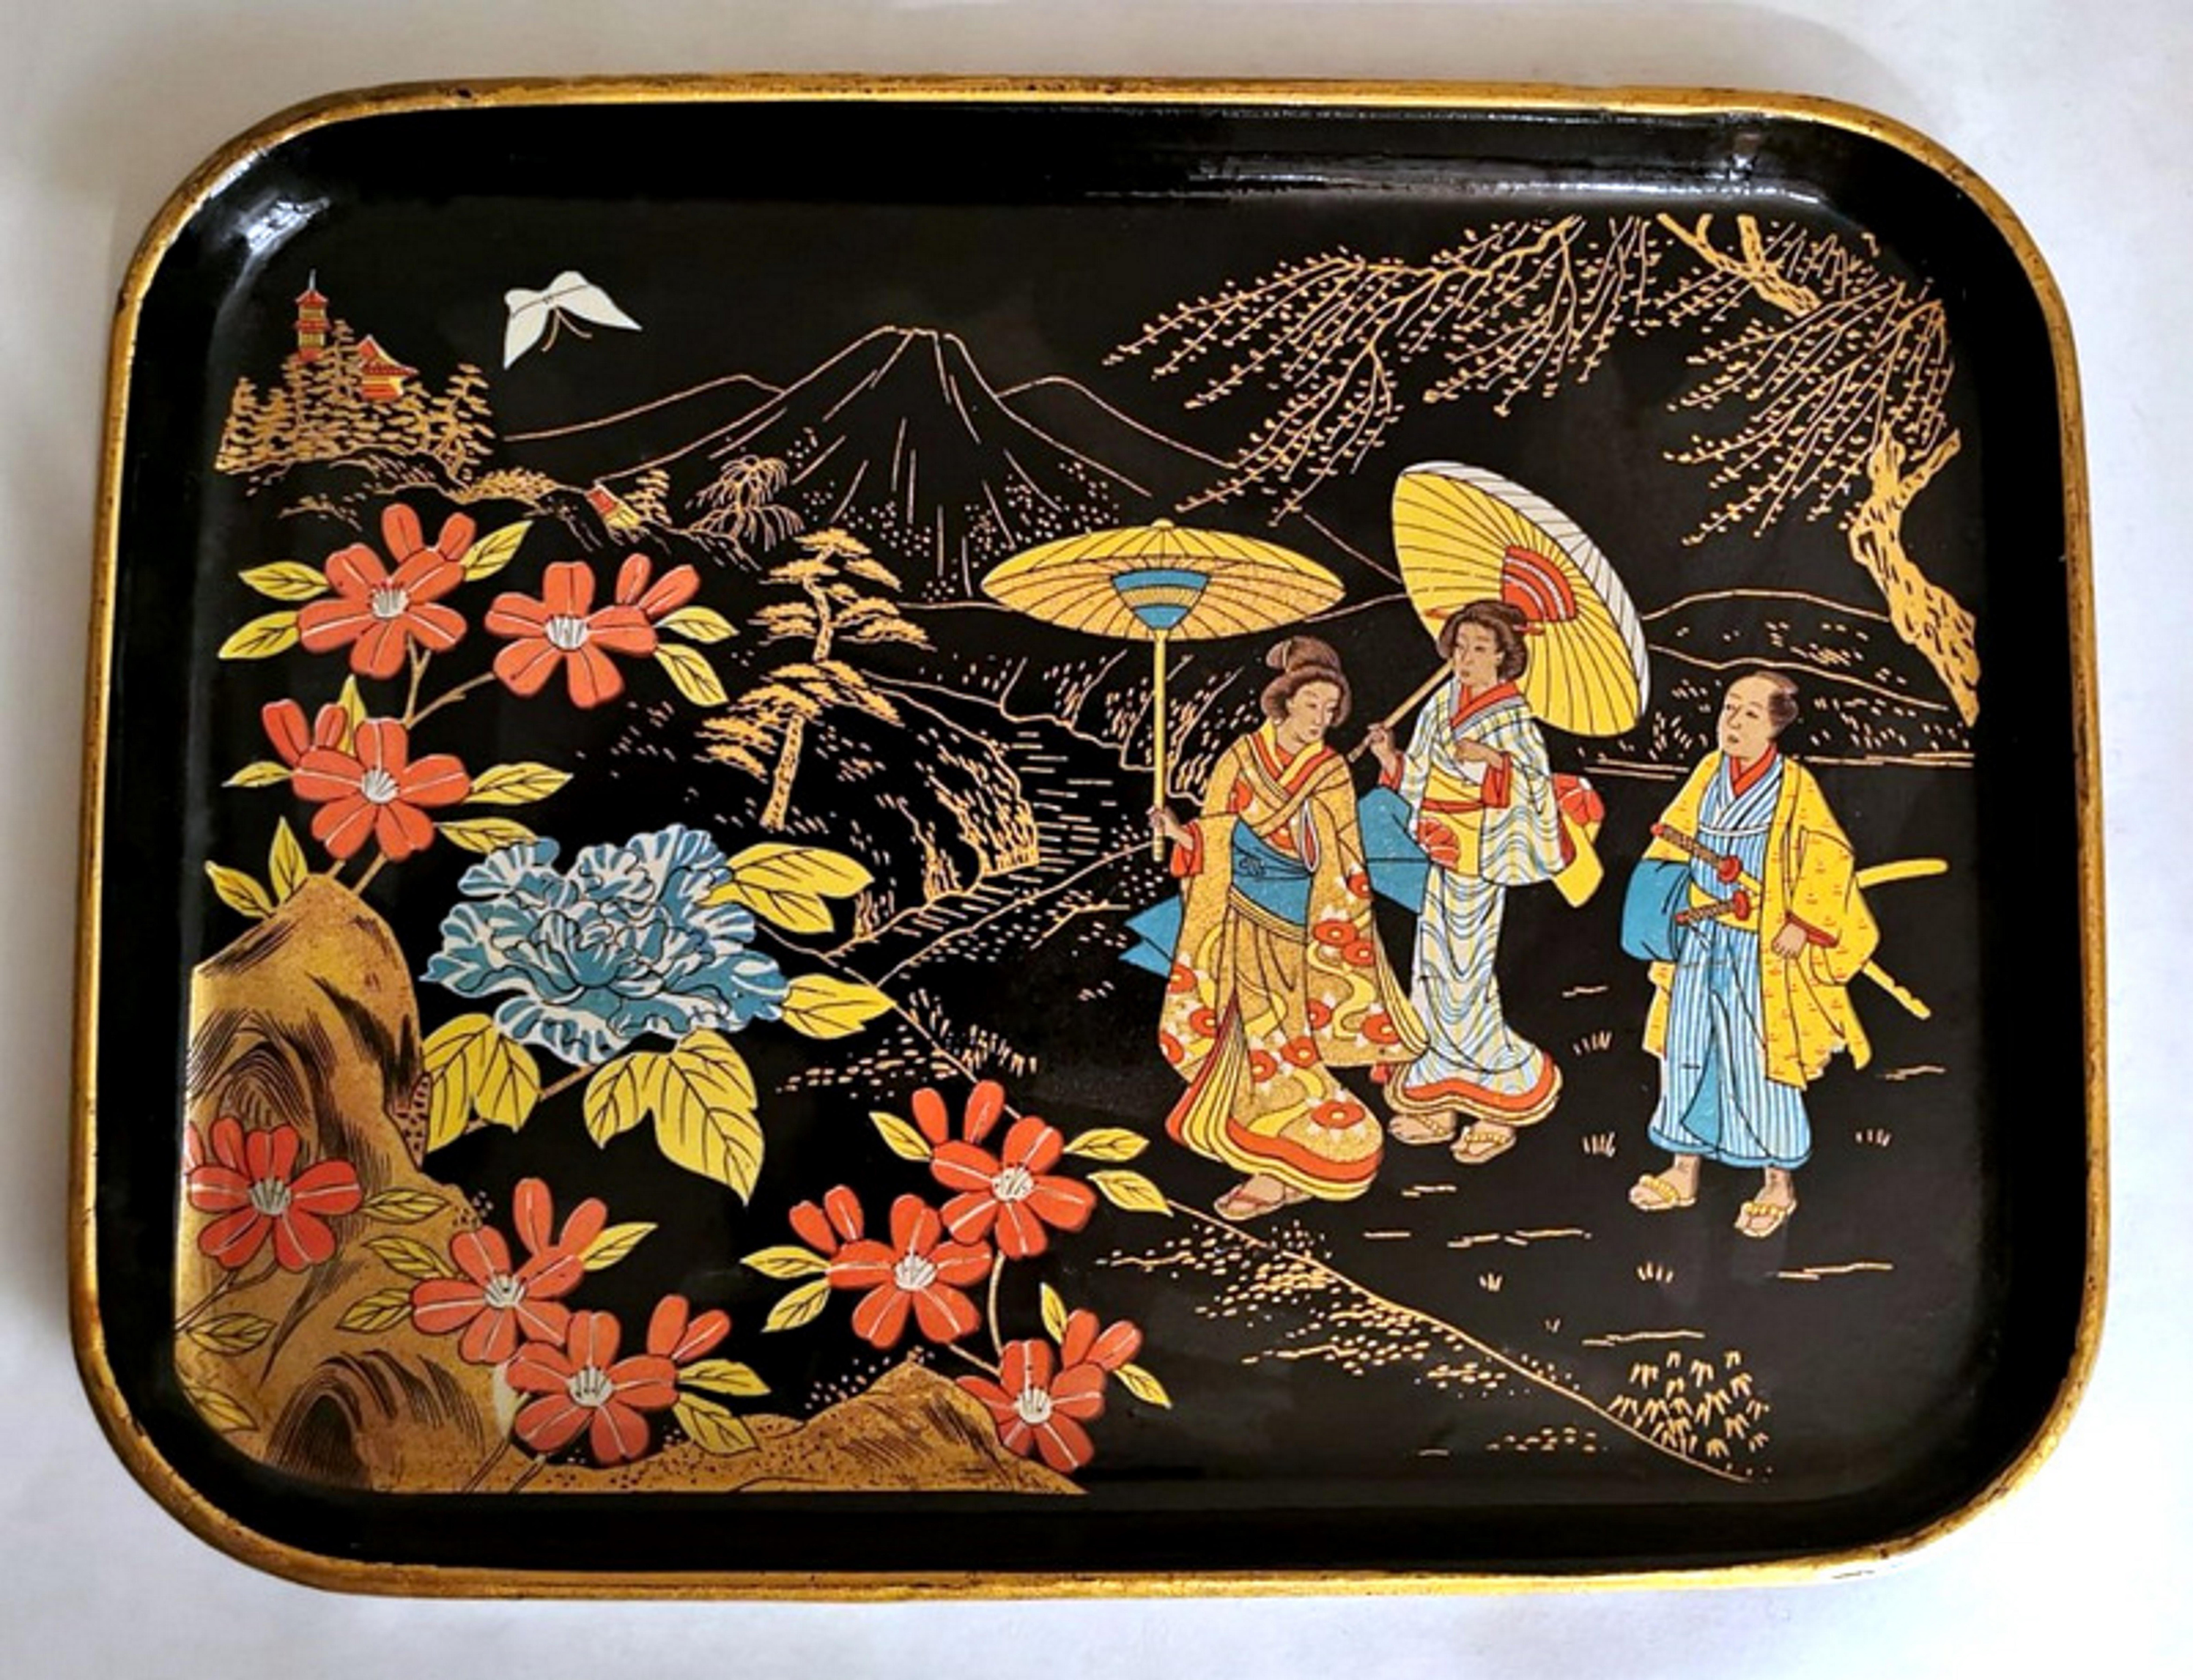 We kindly suggest you read the whole description, because with it we try to give you detailed technical and historical information to guarantee the authenticity of our objects.
Valuable and original French rectangular tray in 